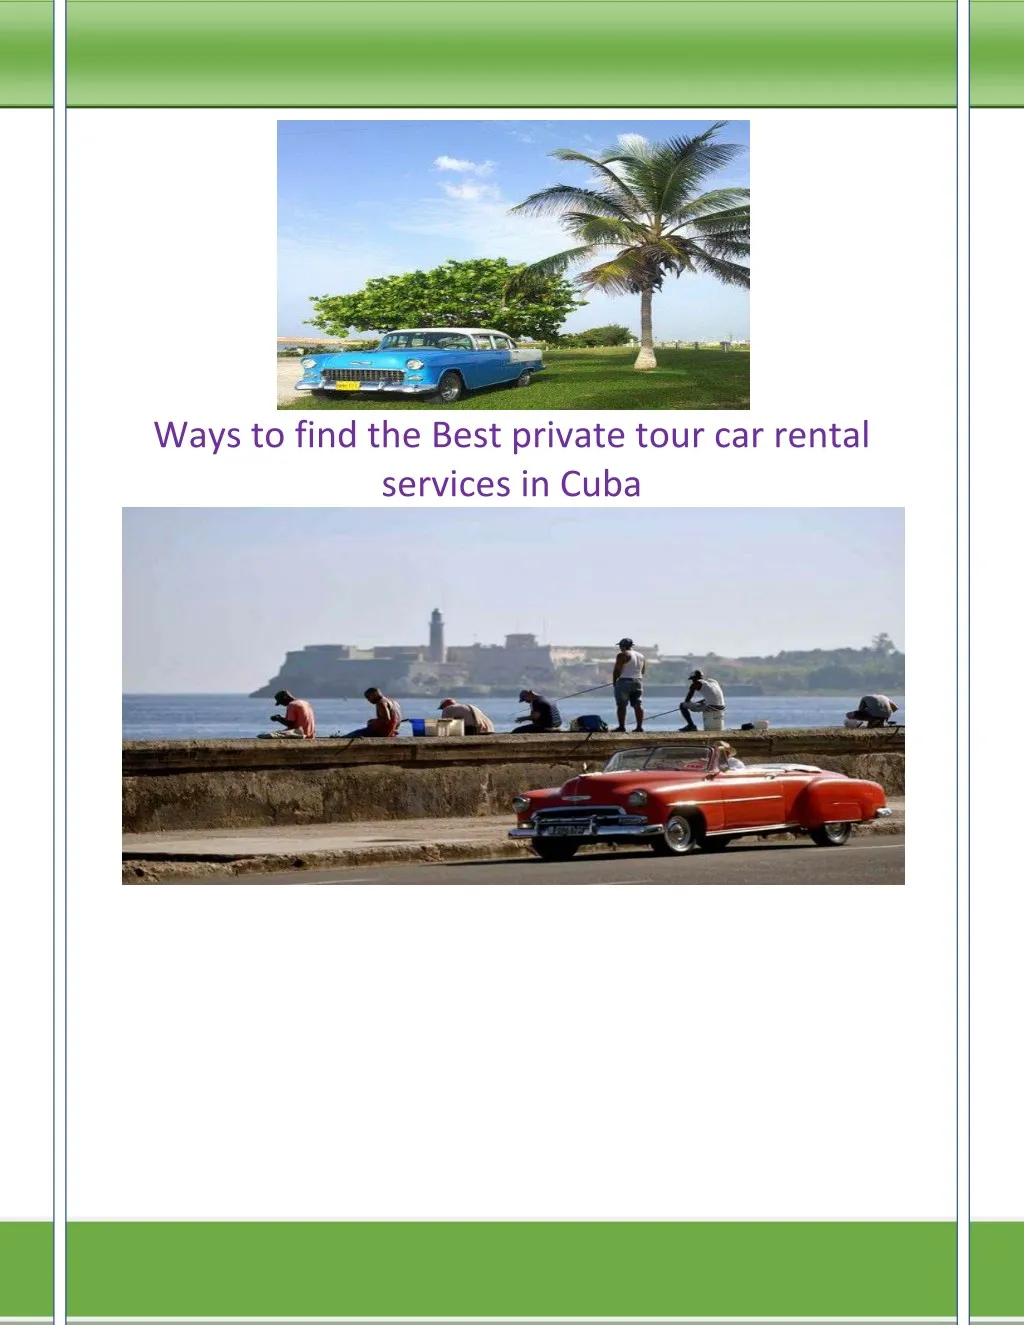 ways to find the best private tour car rental